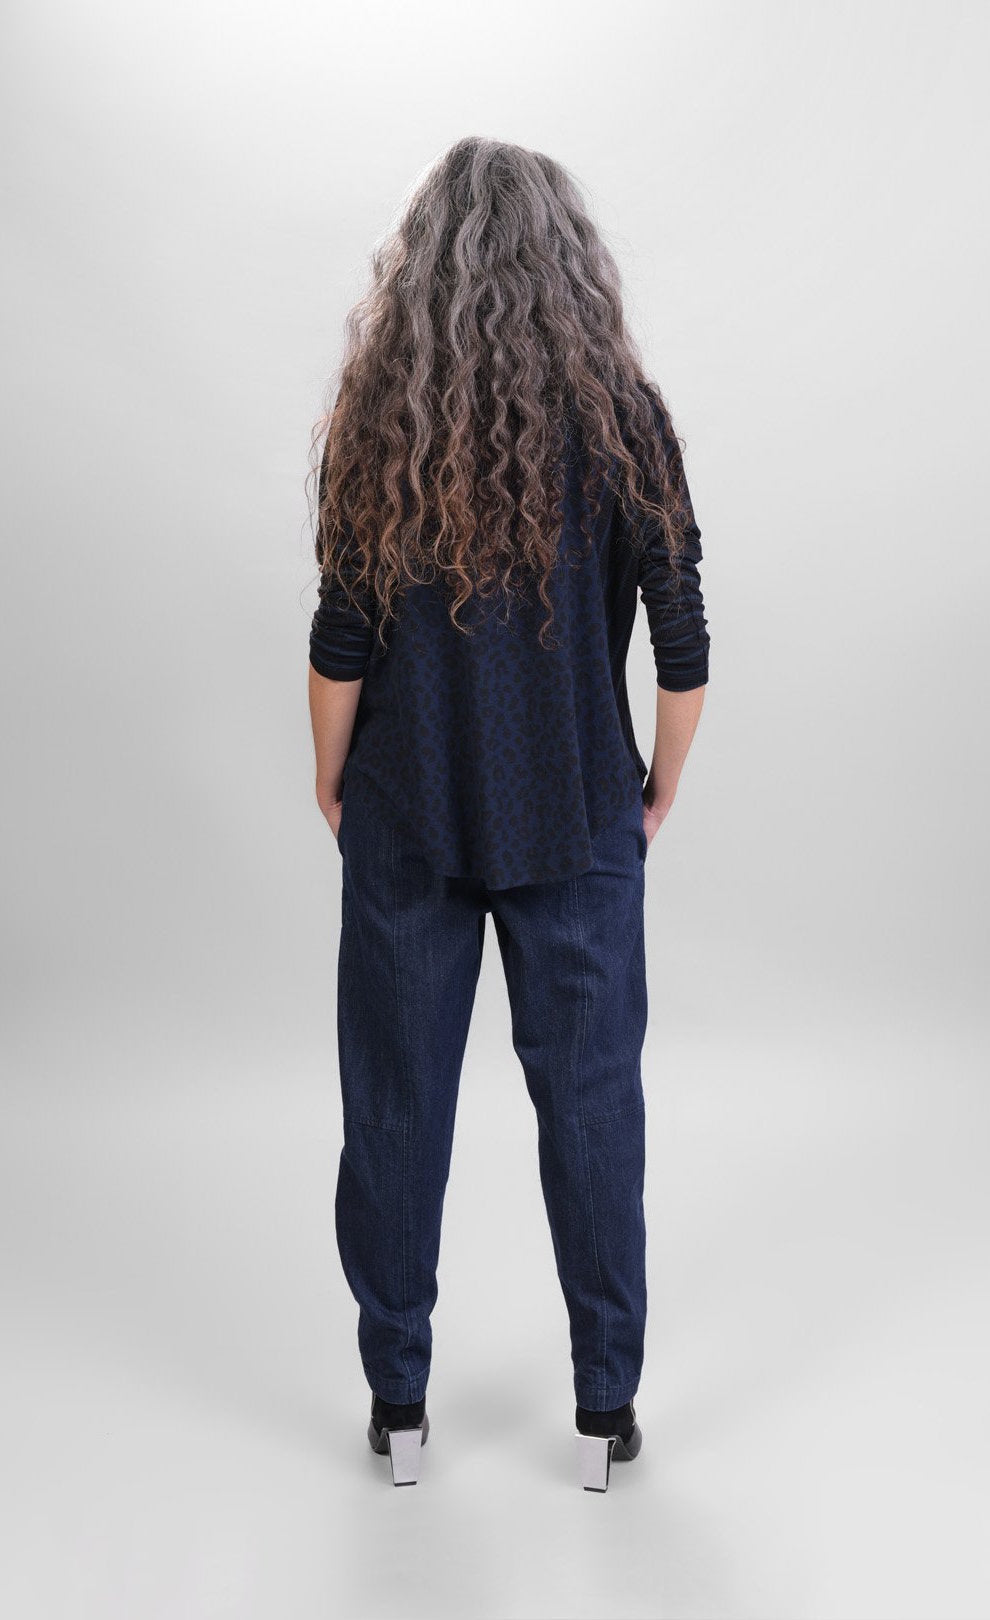 Back full body view of a woman wearing jeans and the alembika chiu raglan top. This top is navy with black and navy stripes on the shoulders and long sleeves and black animal print on the body.